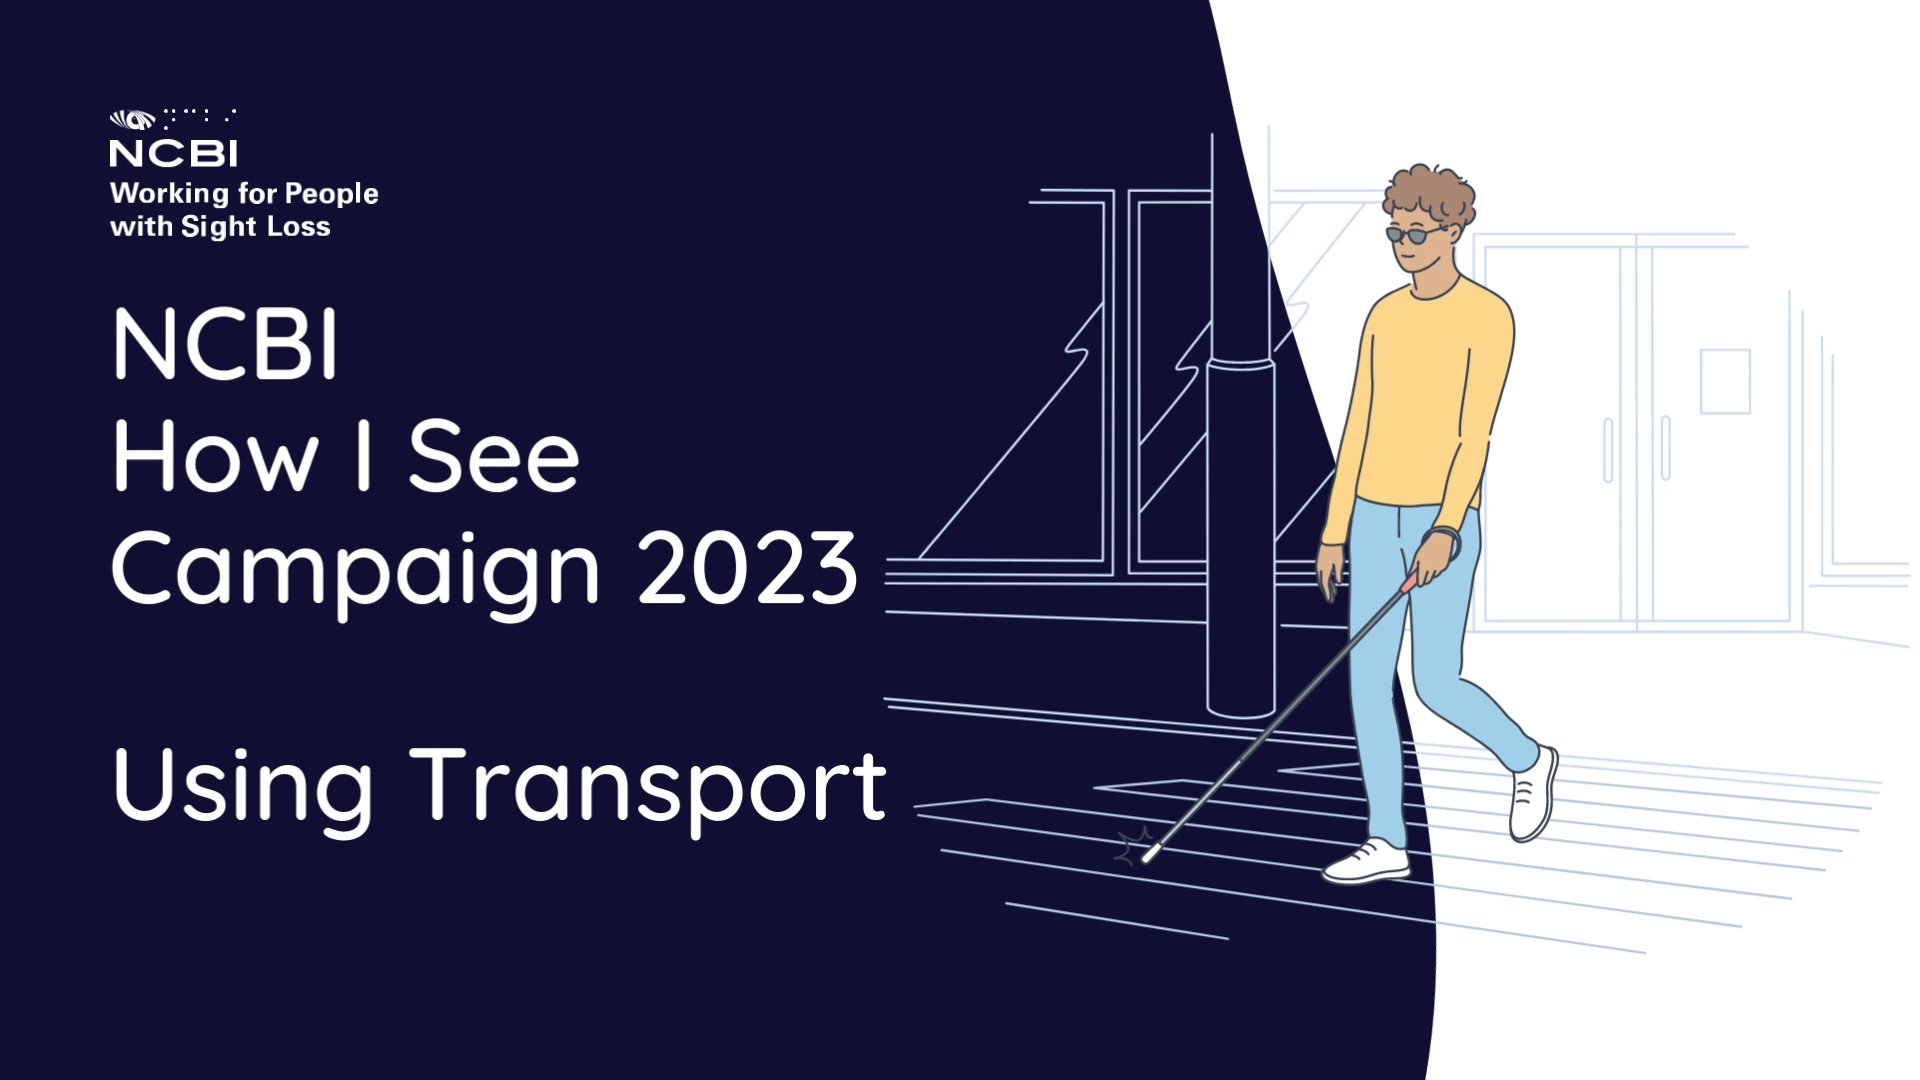 The Vision Ireland How I See over picture has a navy and white background. The Vision Ireland logo is in the top left of the image, while a clip art image of a man with a white cane walking across a road crossing is over to the right of the image. The text on the image reads How I See Campaign 2023. Using Transport.